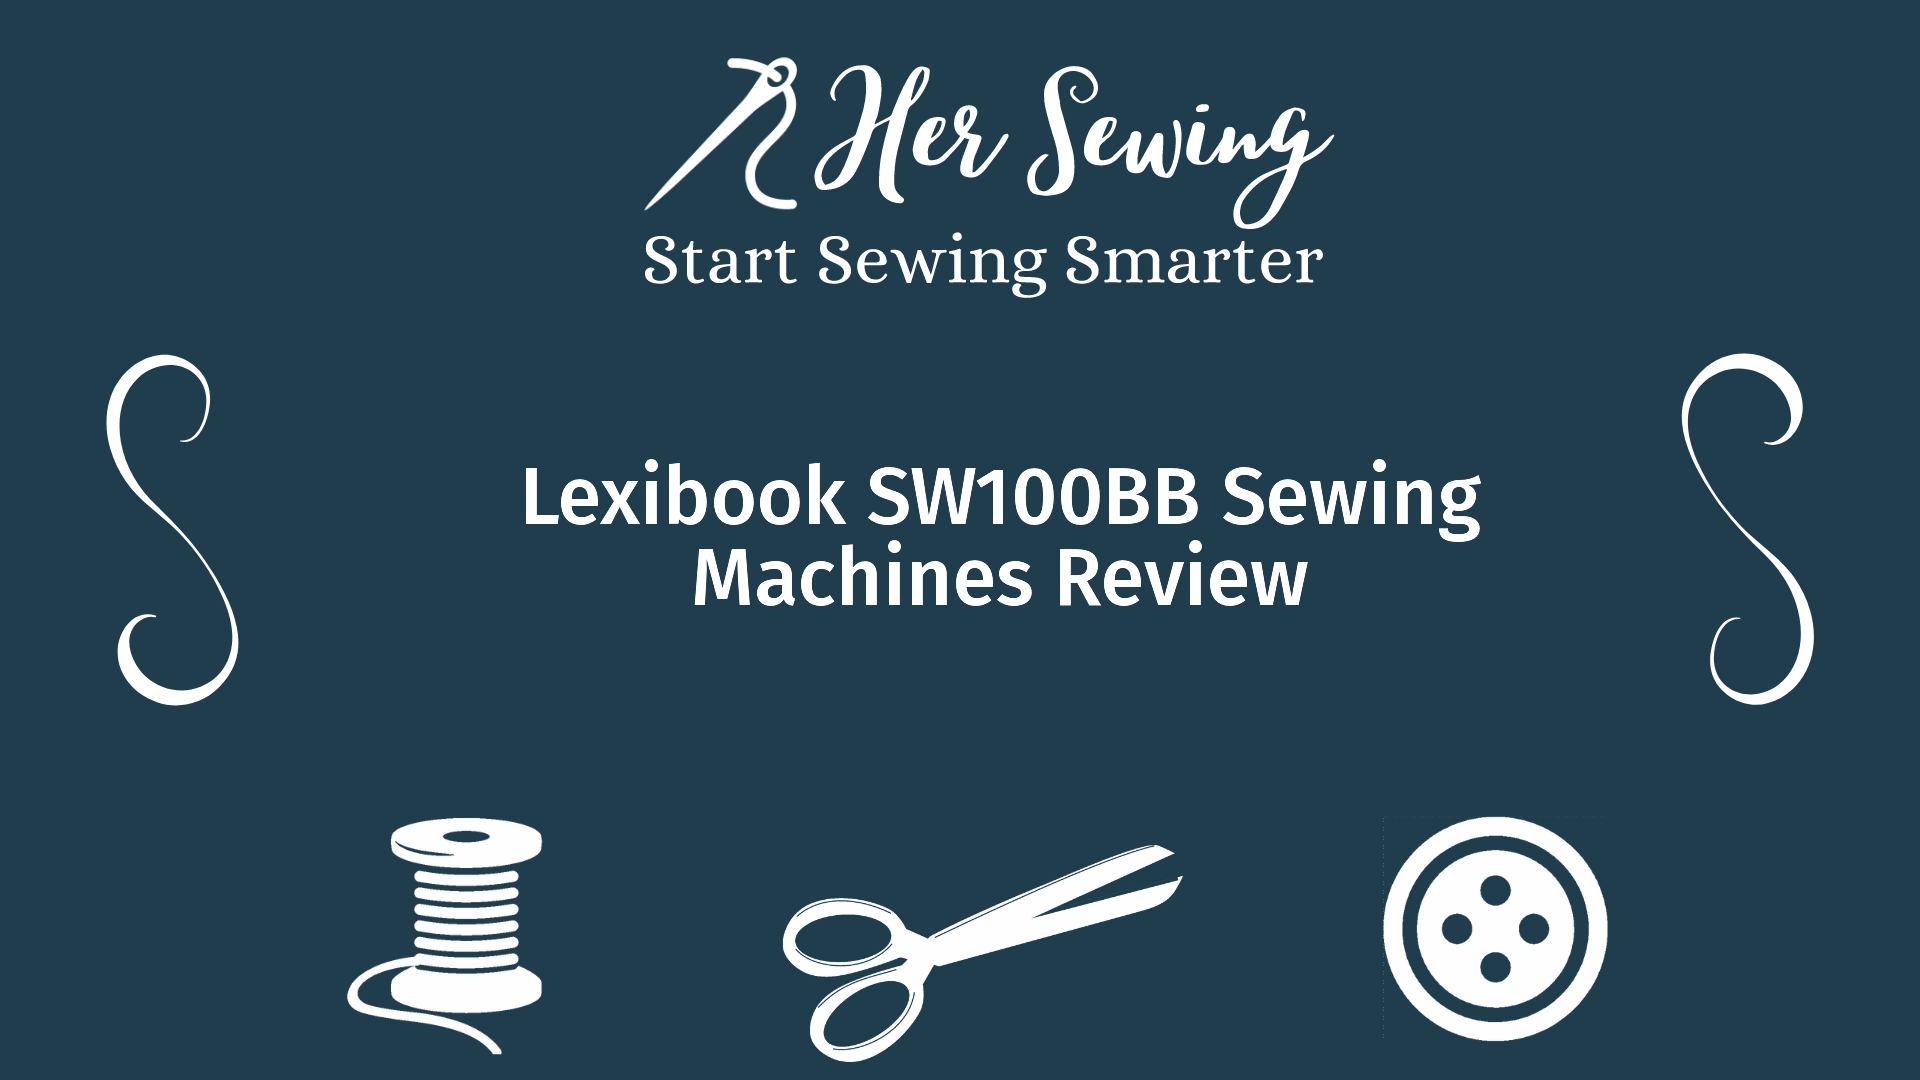 Lexibook SW100BB Sewing Machines Review